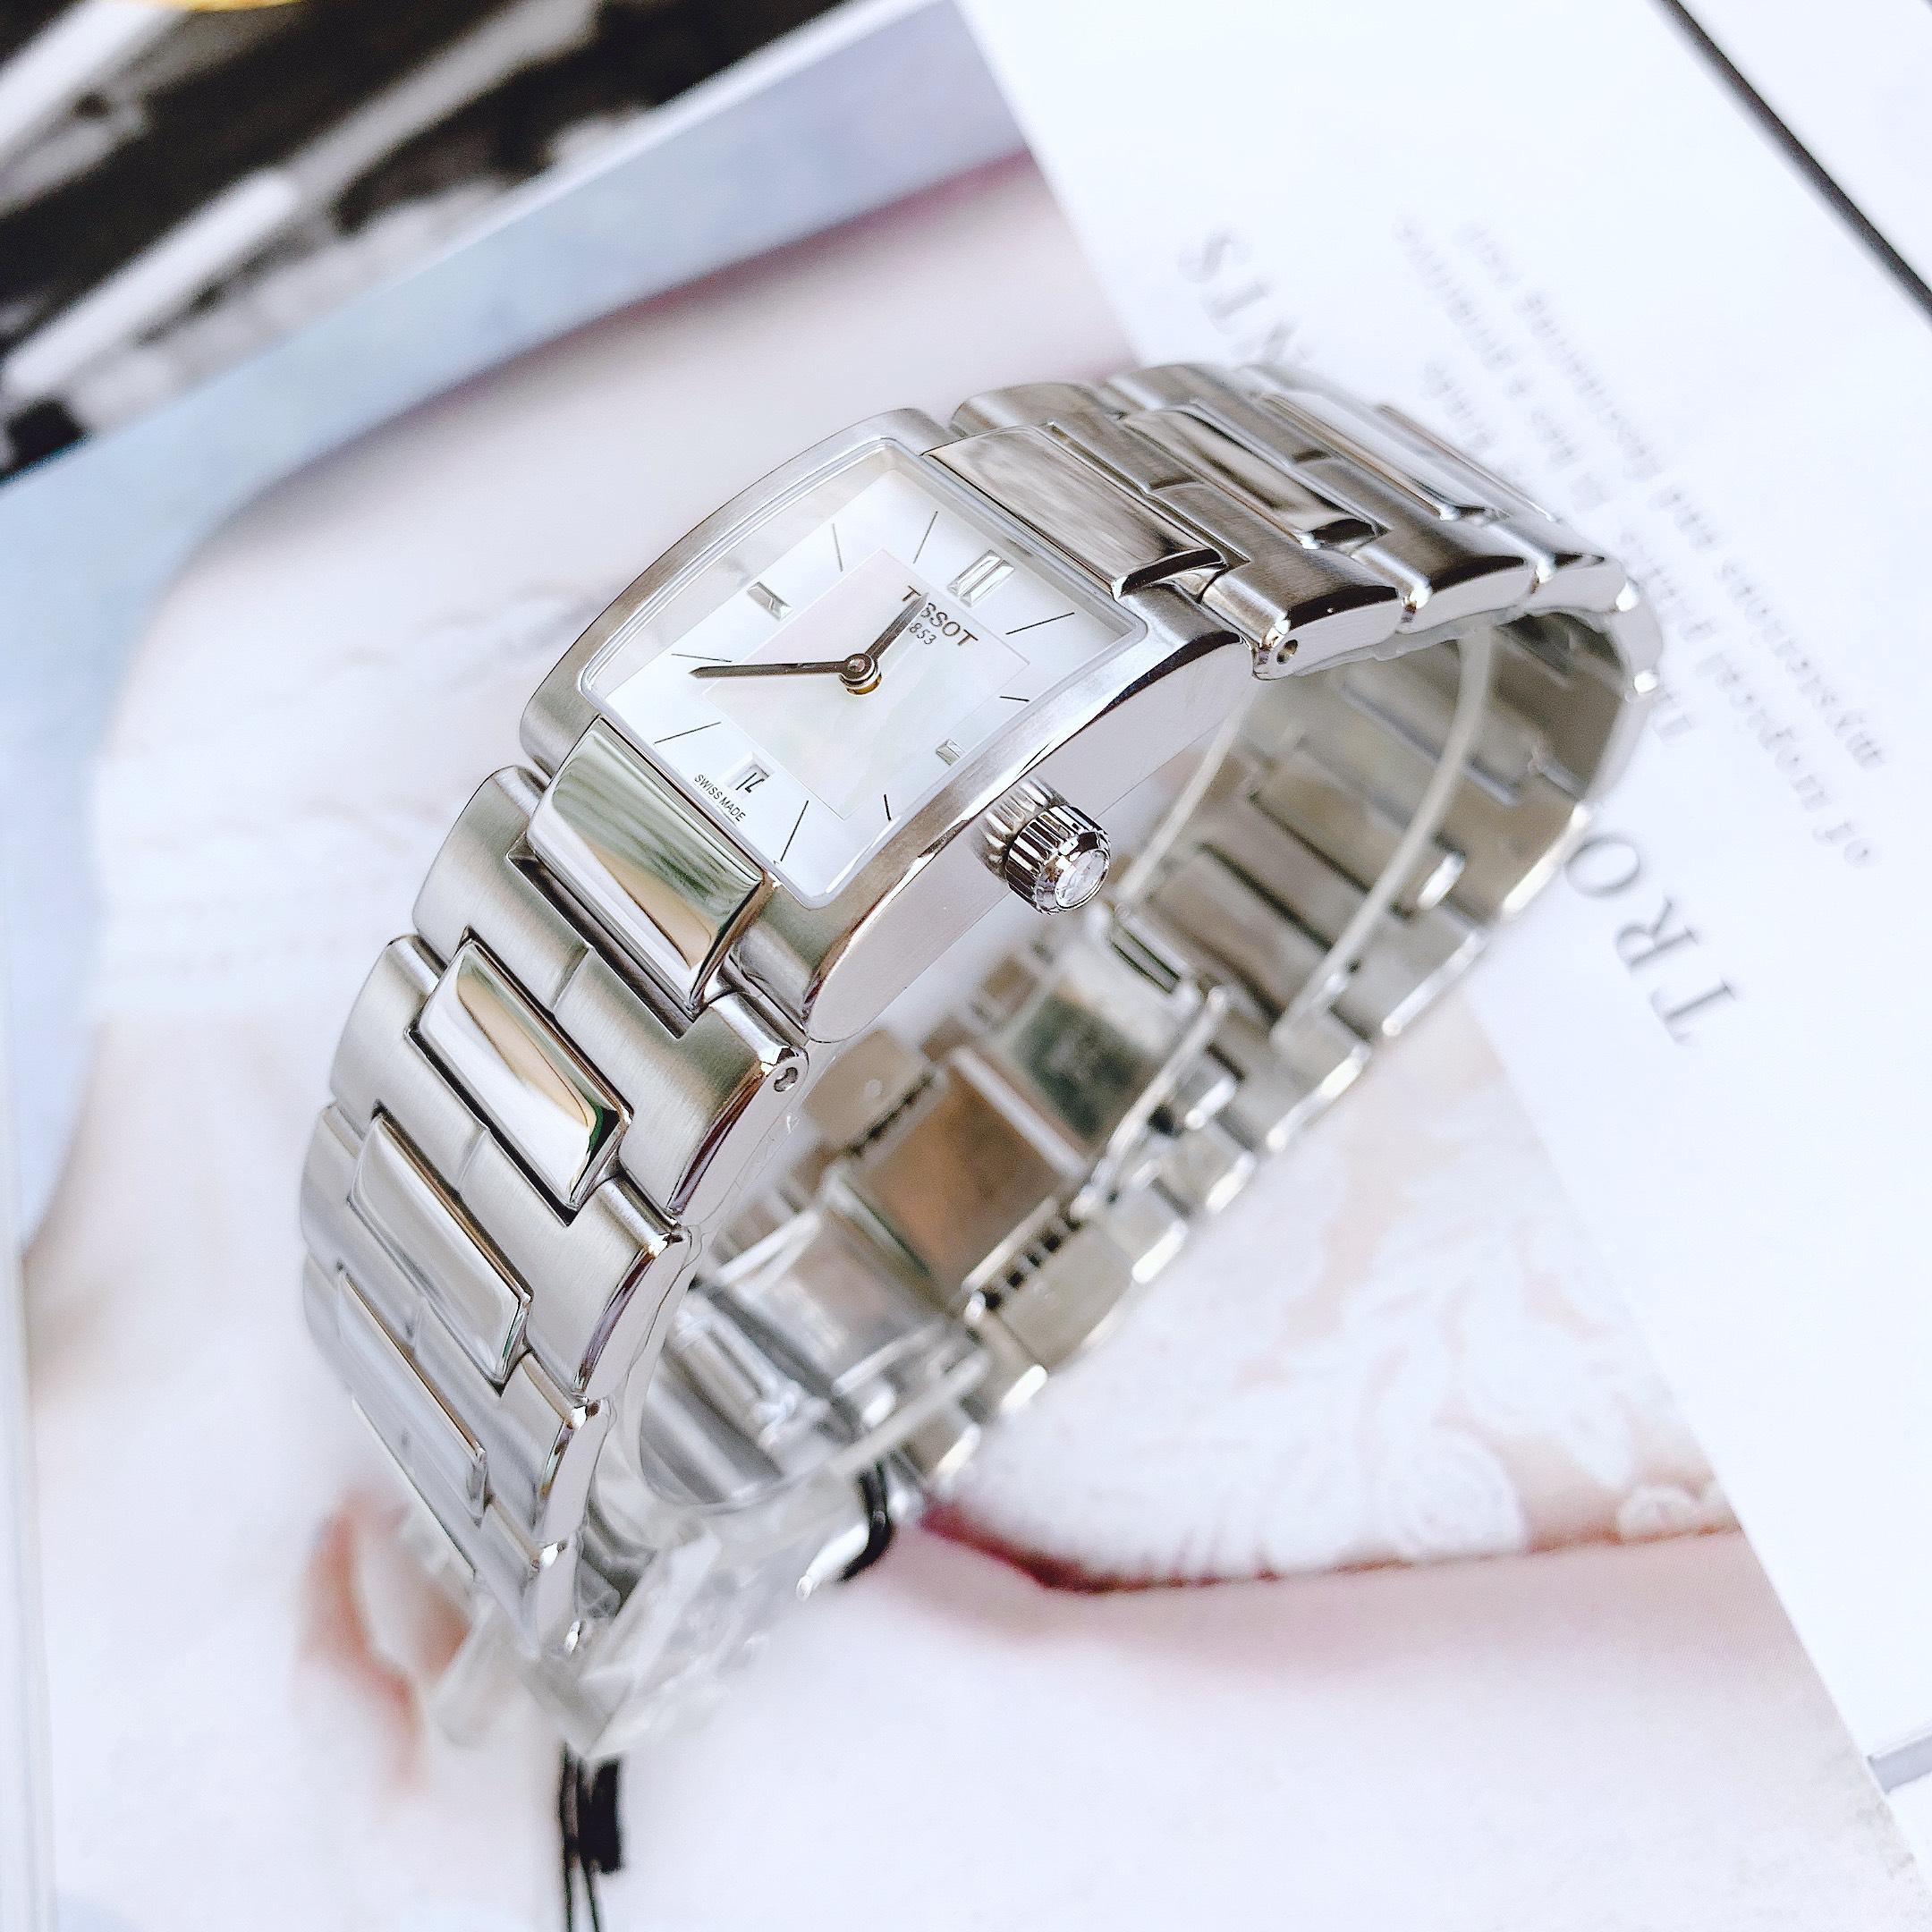 ĐỒNG HỒ DÂY KIM LOẠI TISSOT MOTHER OF PEARL DIAL 4